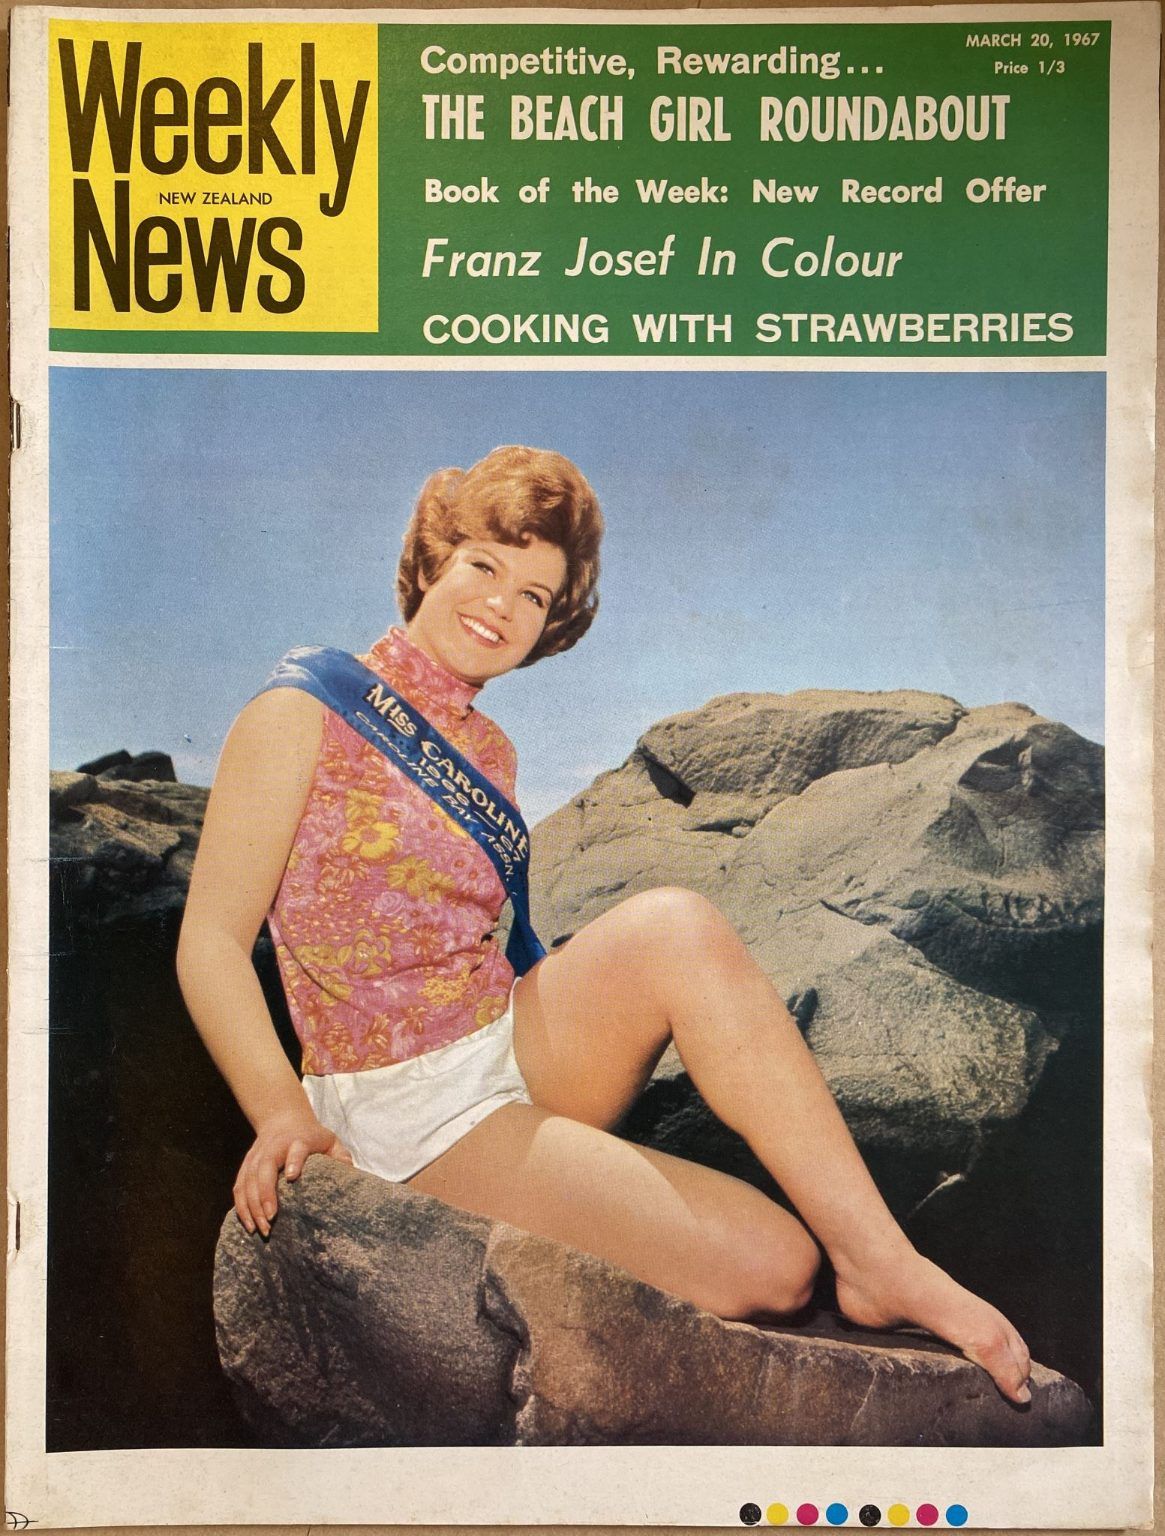 OLD NEWSPAPER: New Zealand Weekly News, No. 5390, 20 March 1967